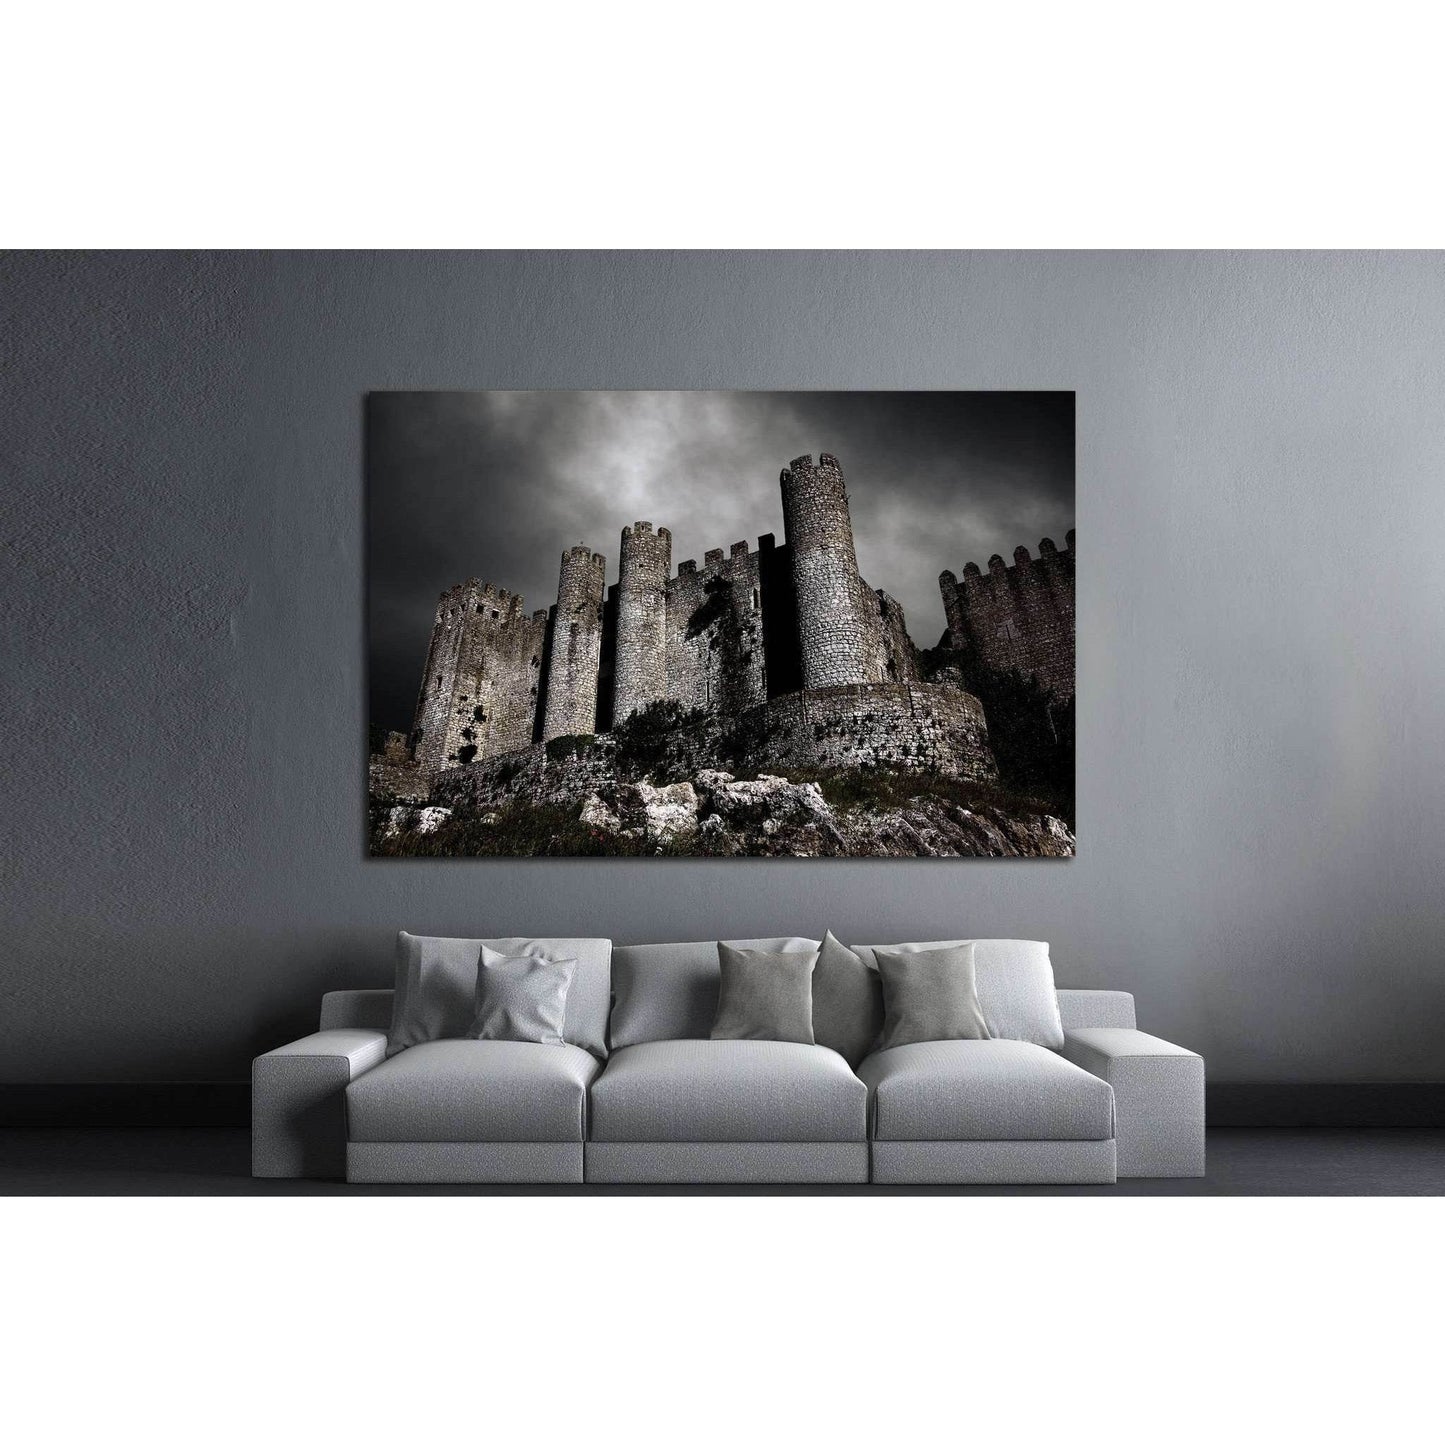 Medieval Castle Under Brooding Sky Canvas Print for Historic DecorThis canvas print portrays an imposing medieval castle set against a dramatic sky, evoking a sense of history and timeless strength. The moody atmosphere captured in this image makes it a c